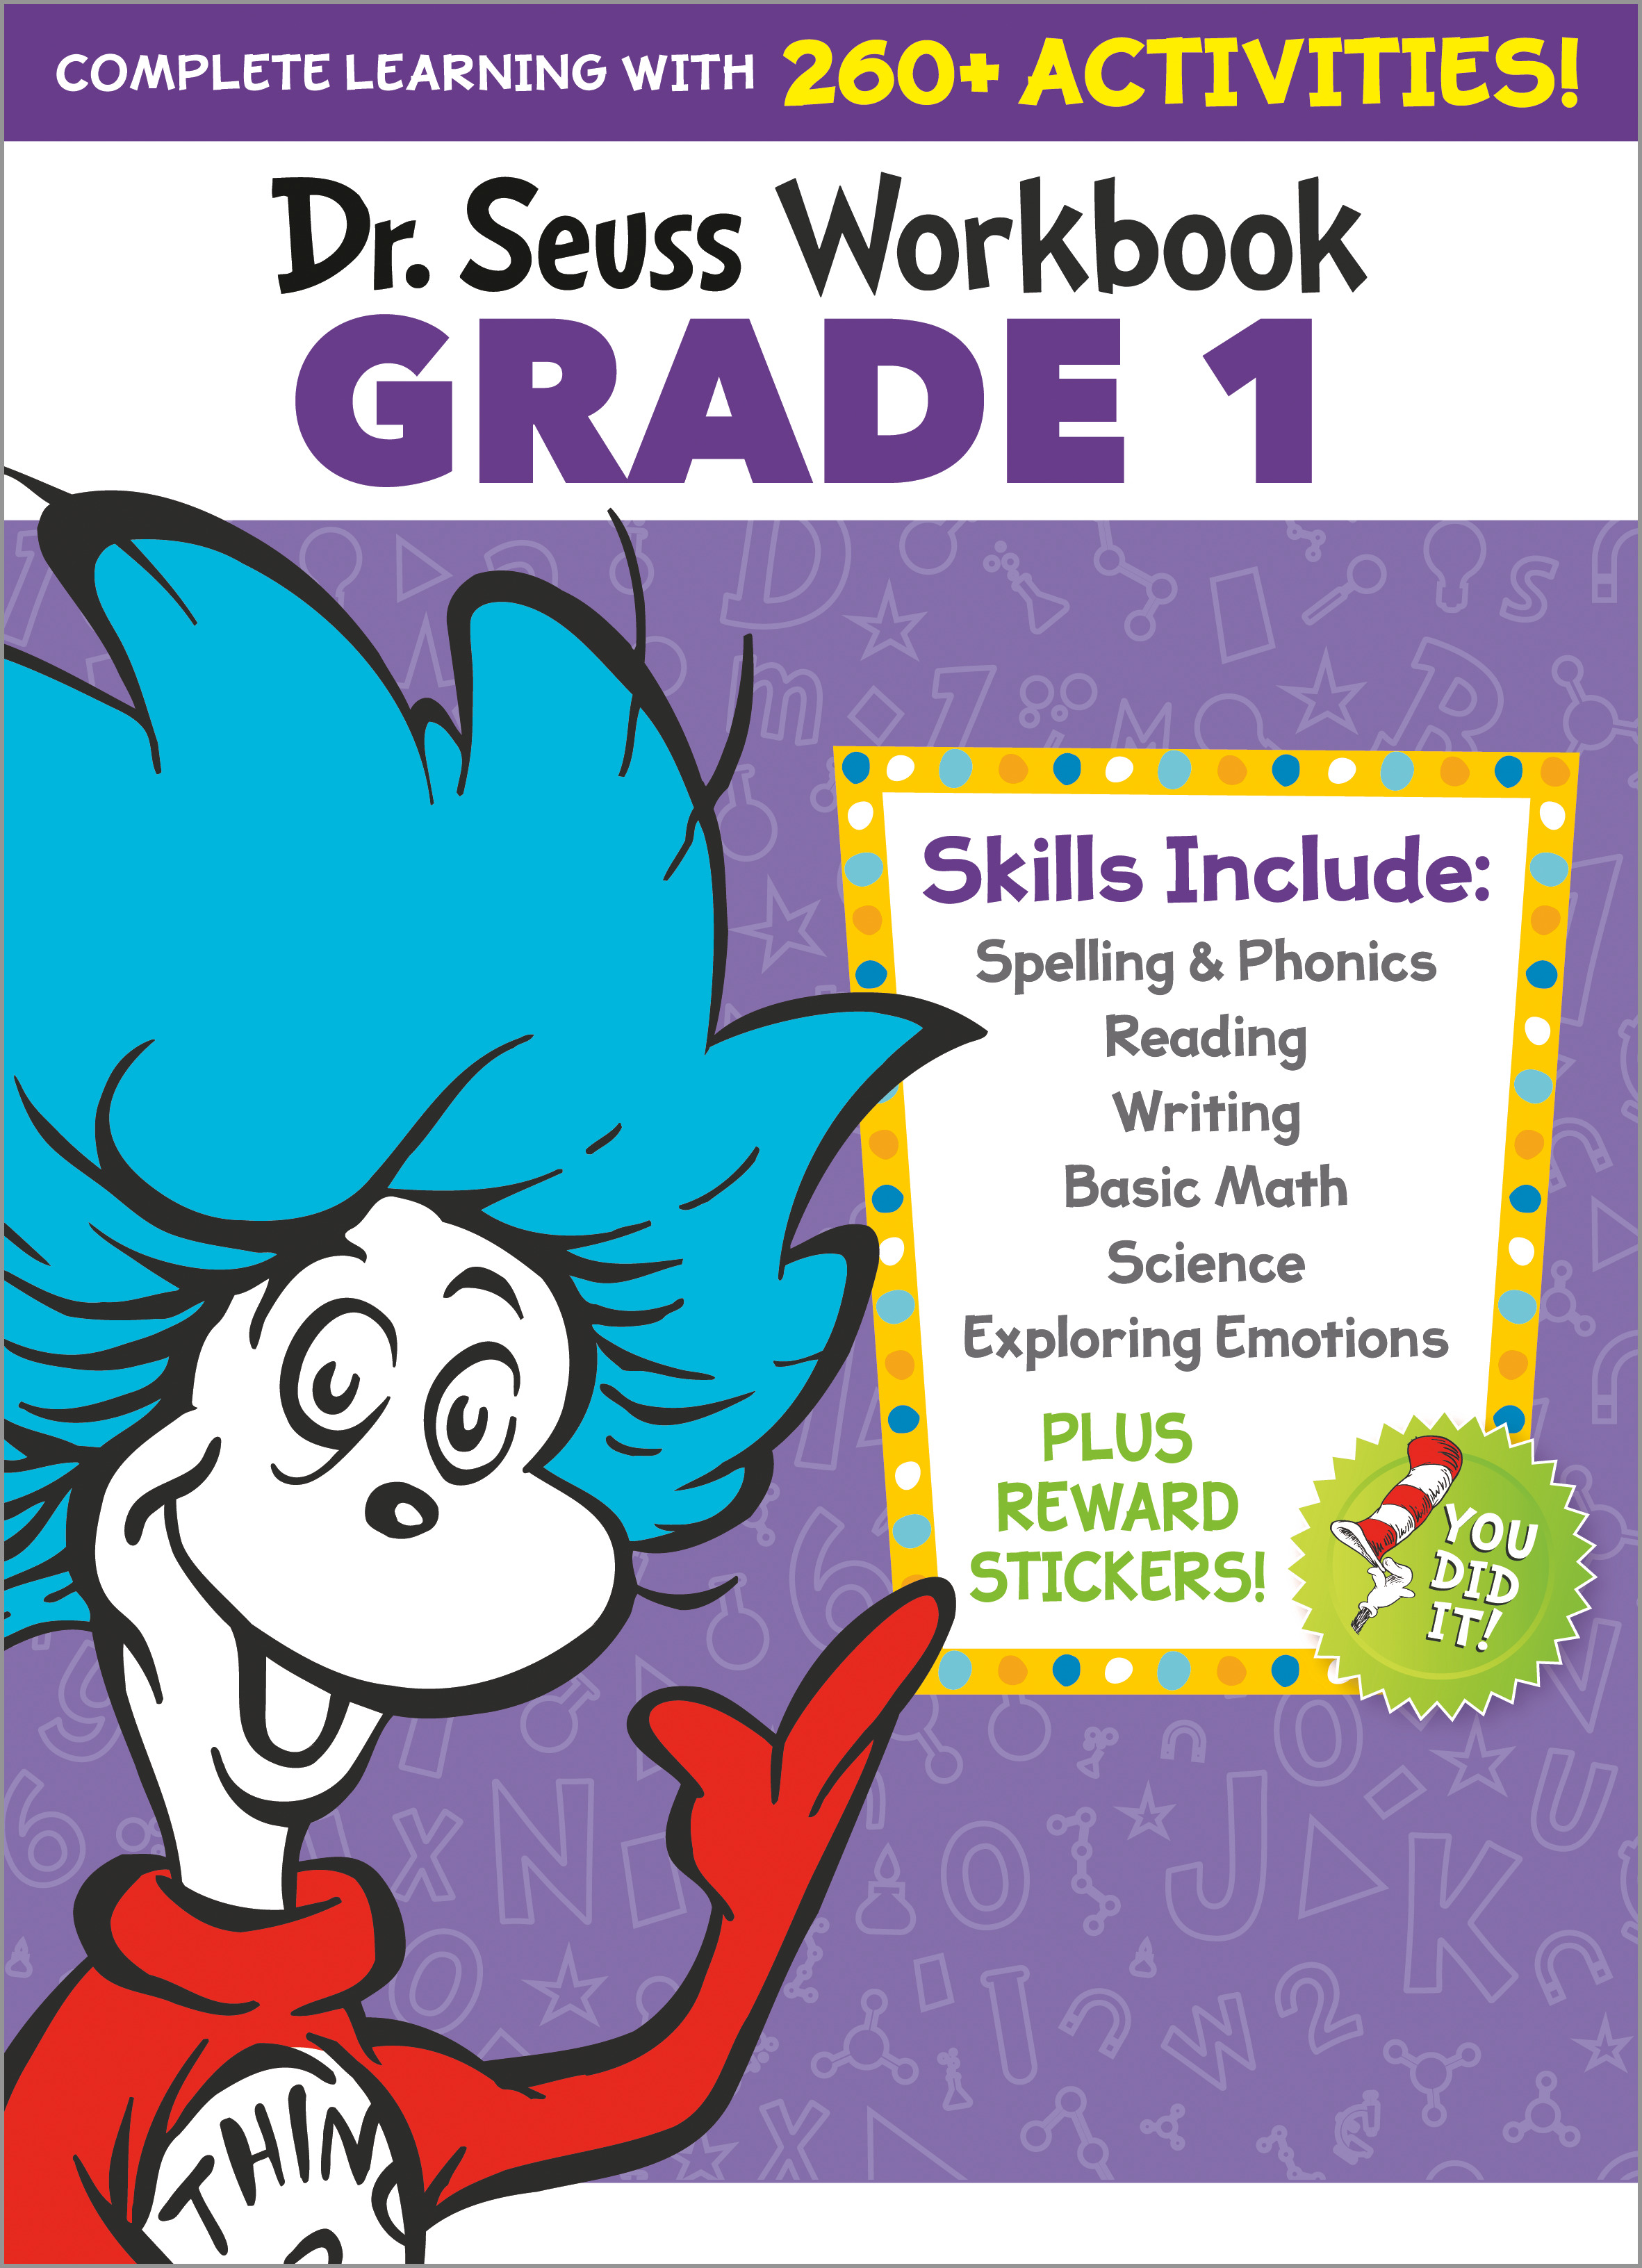 Dr. Seuss Workbook: Grade 1 : 260+ Fun Activities with Stickers and More! (Spelling, Phonics, Sight Words, Writing, Reading Comprehension, Math, Addition &amp; Subtraction, Science, SEL) | Activity book